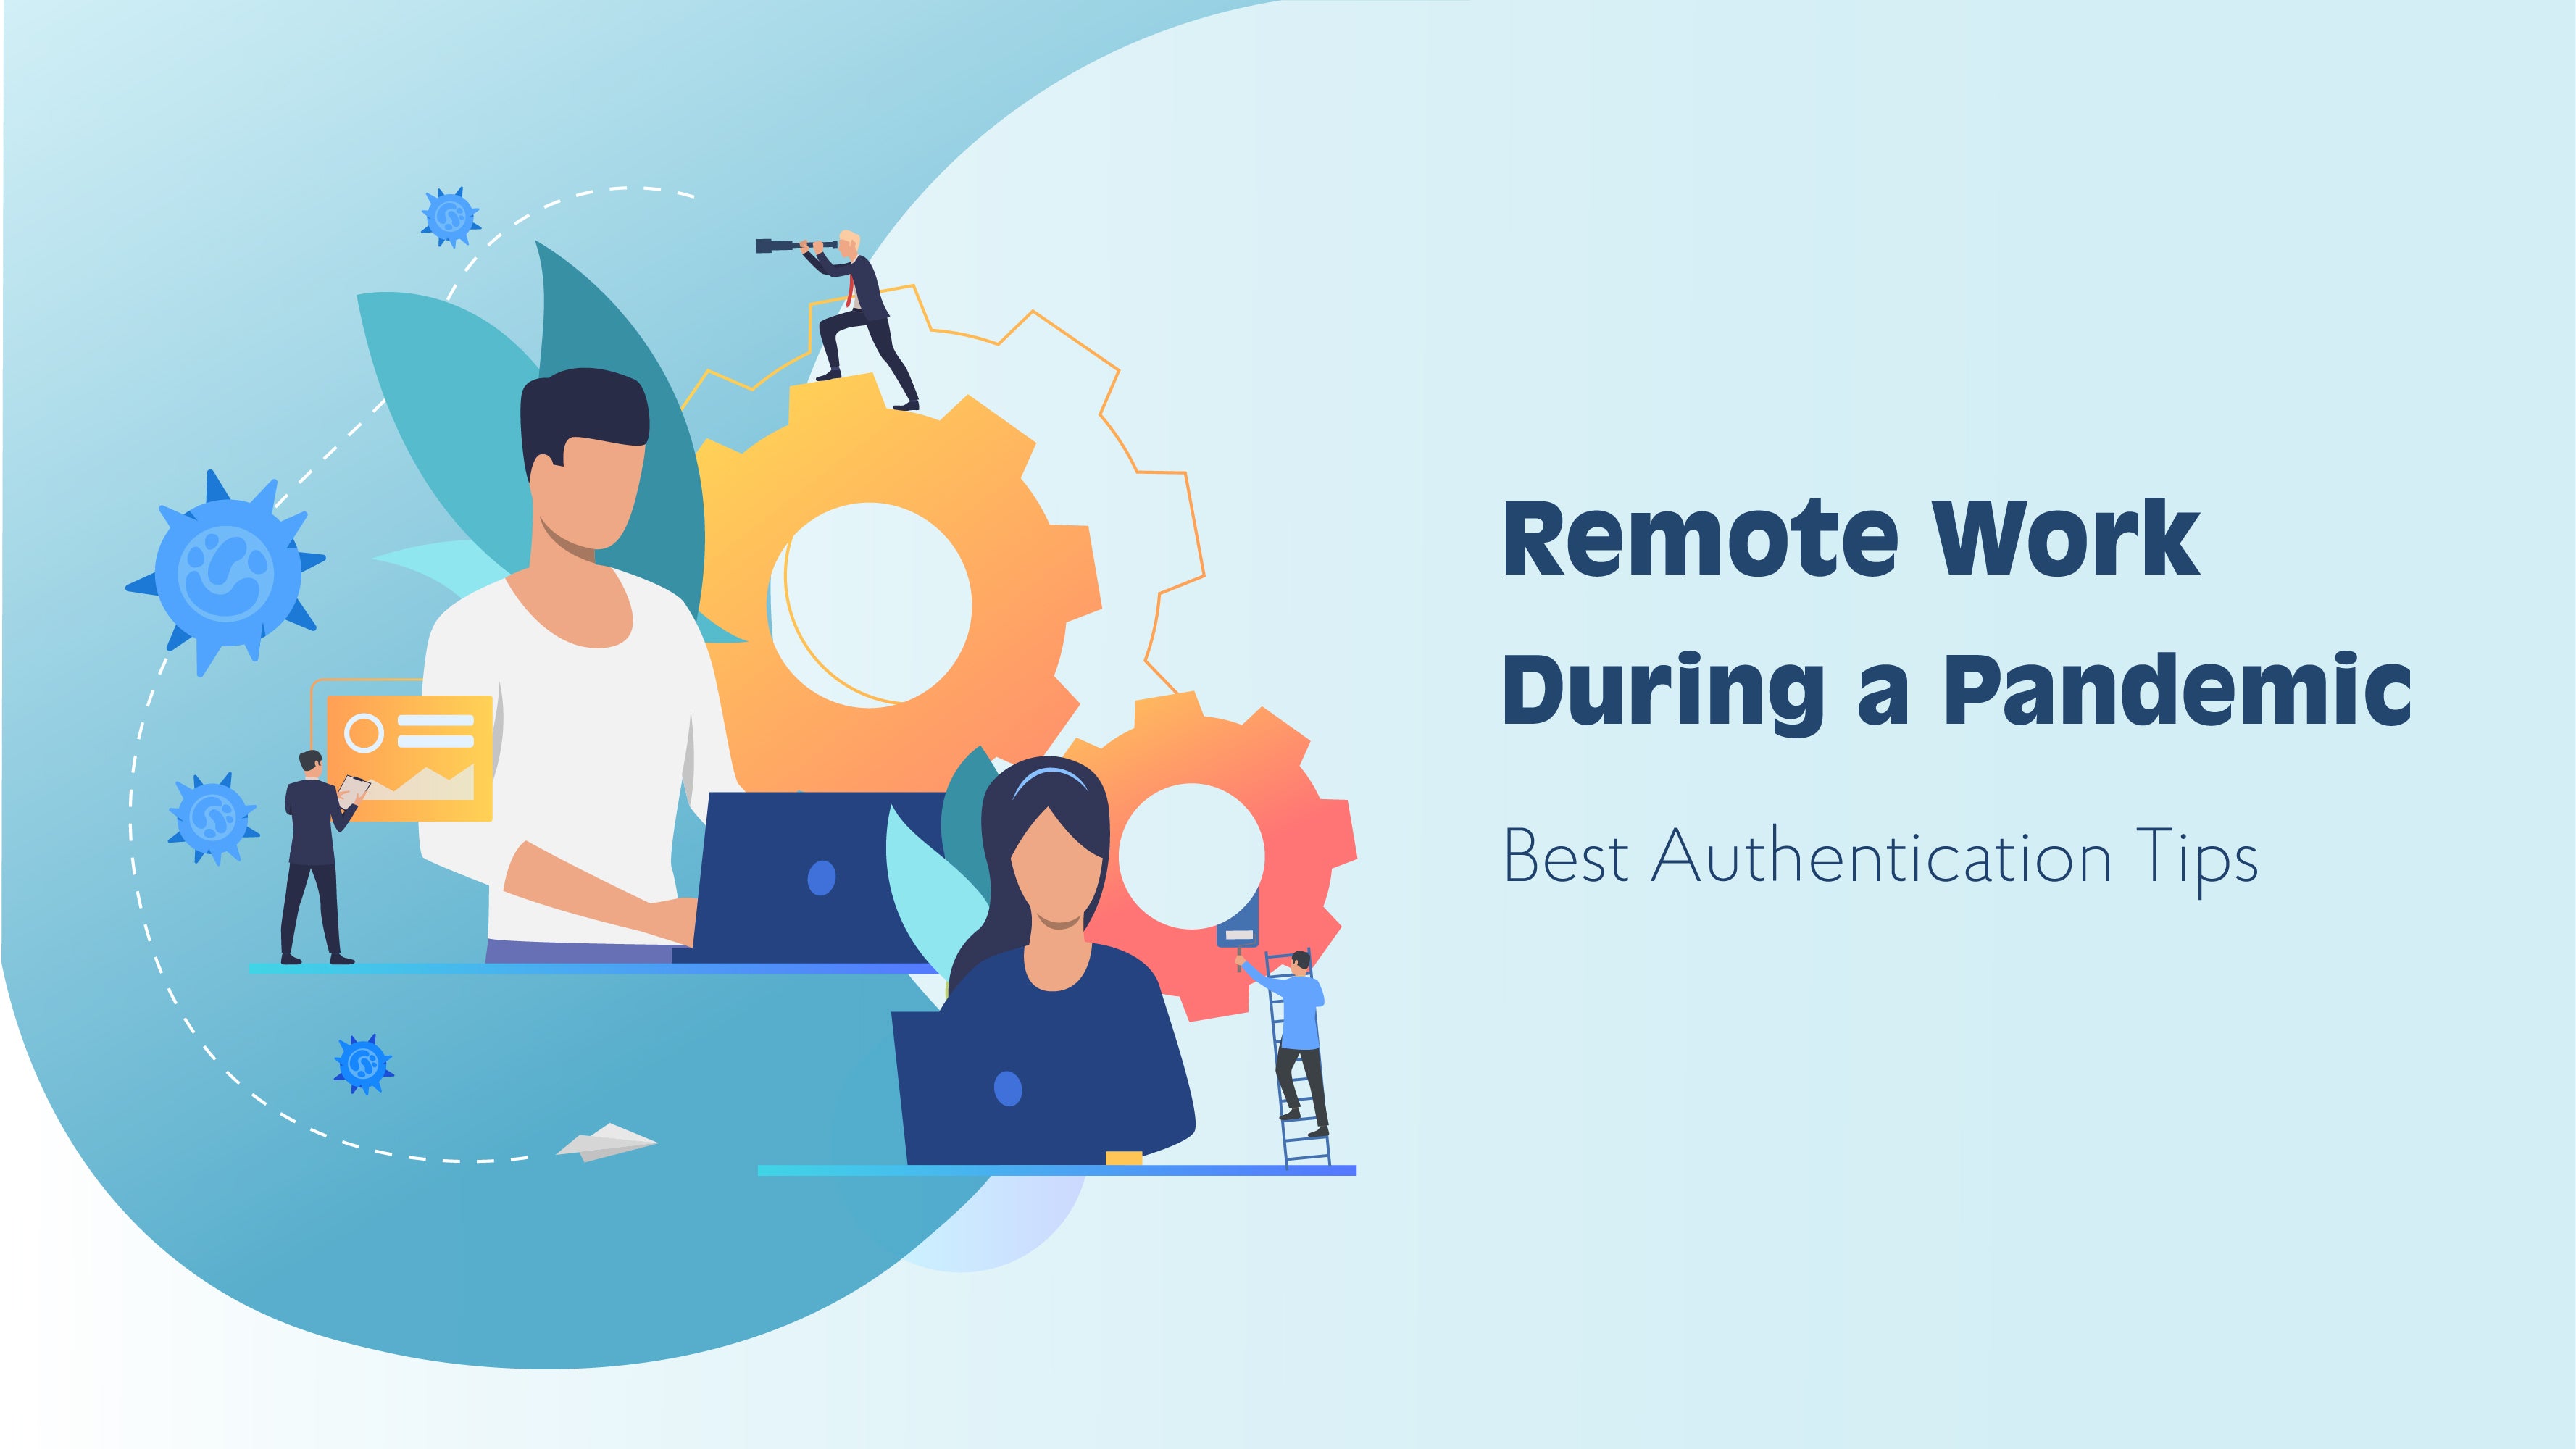 Secure remote work during COVID-19